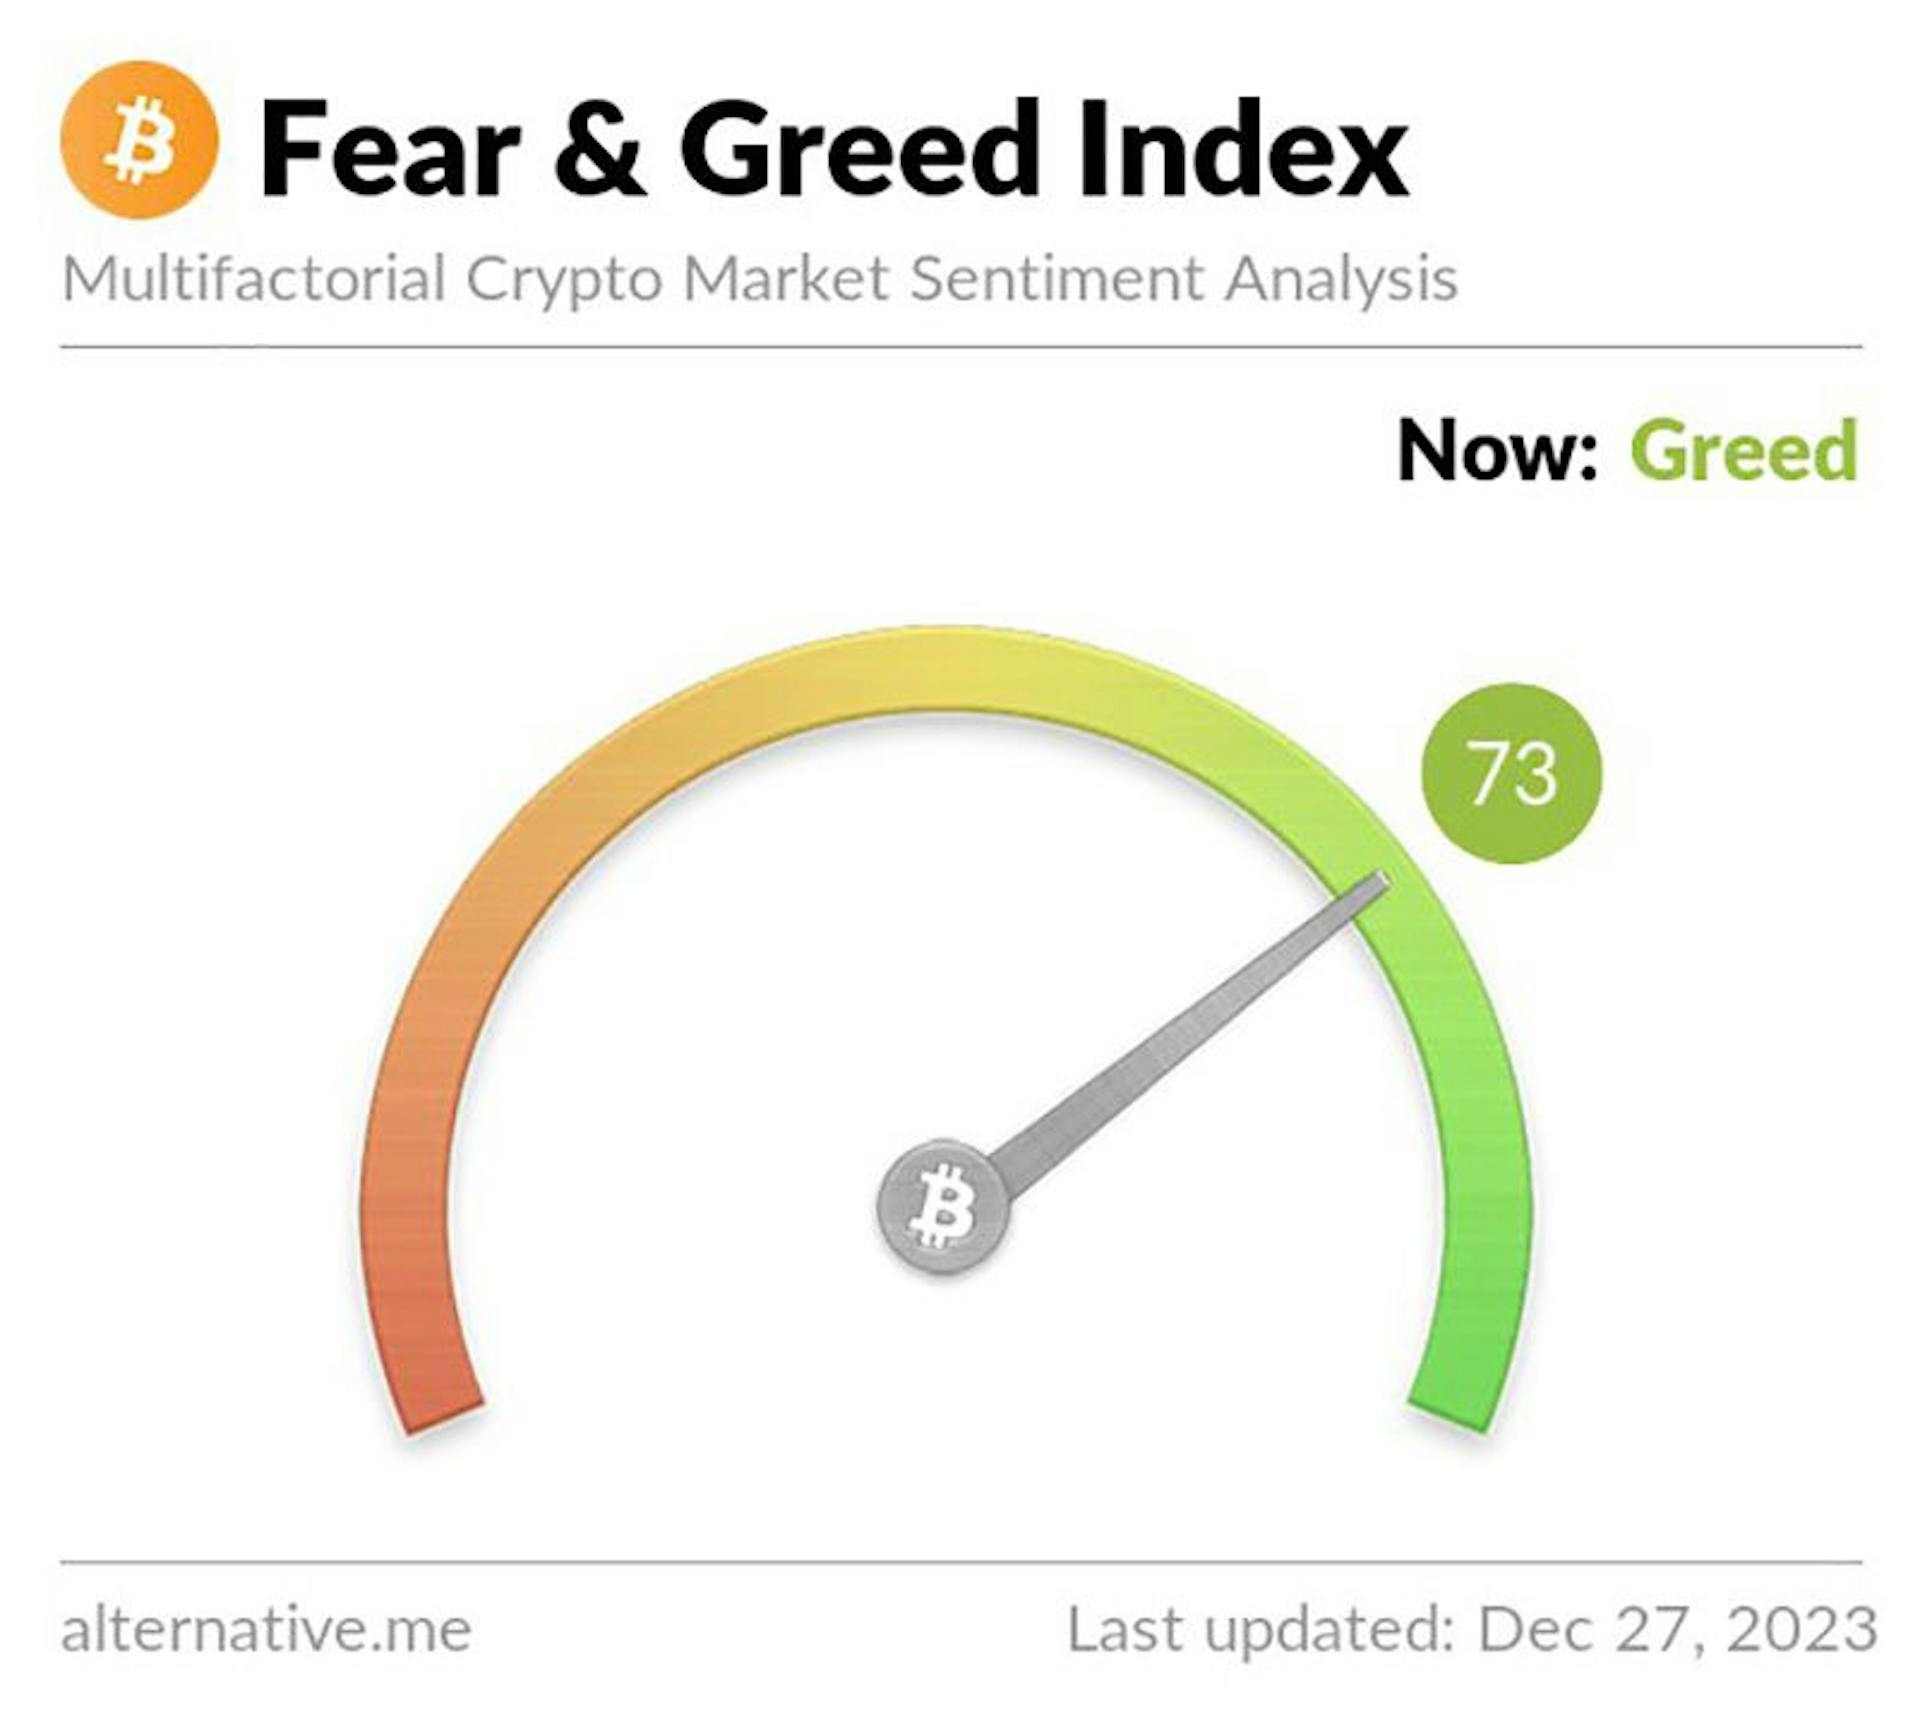 Is greed good? Crypto sentiment says yes!